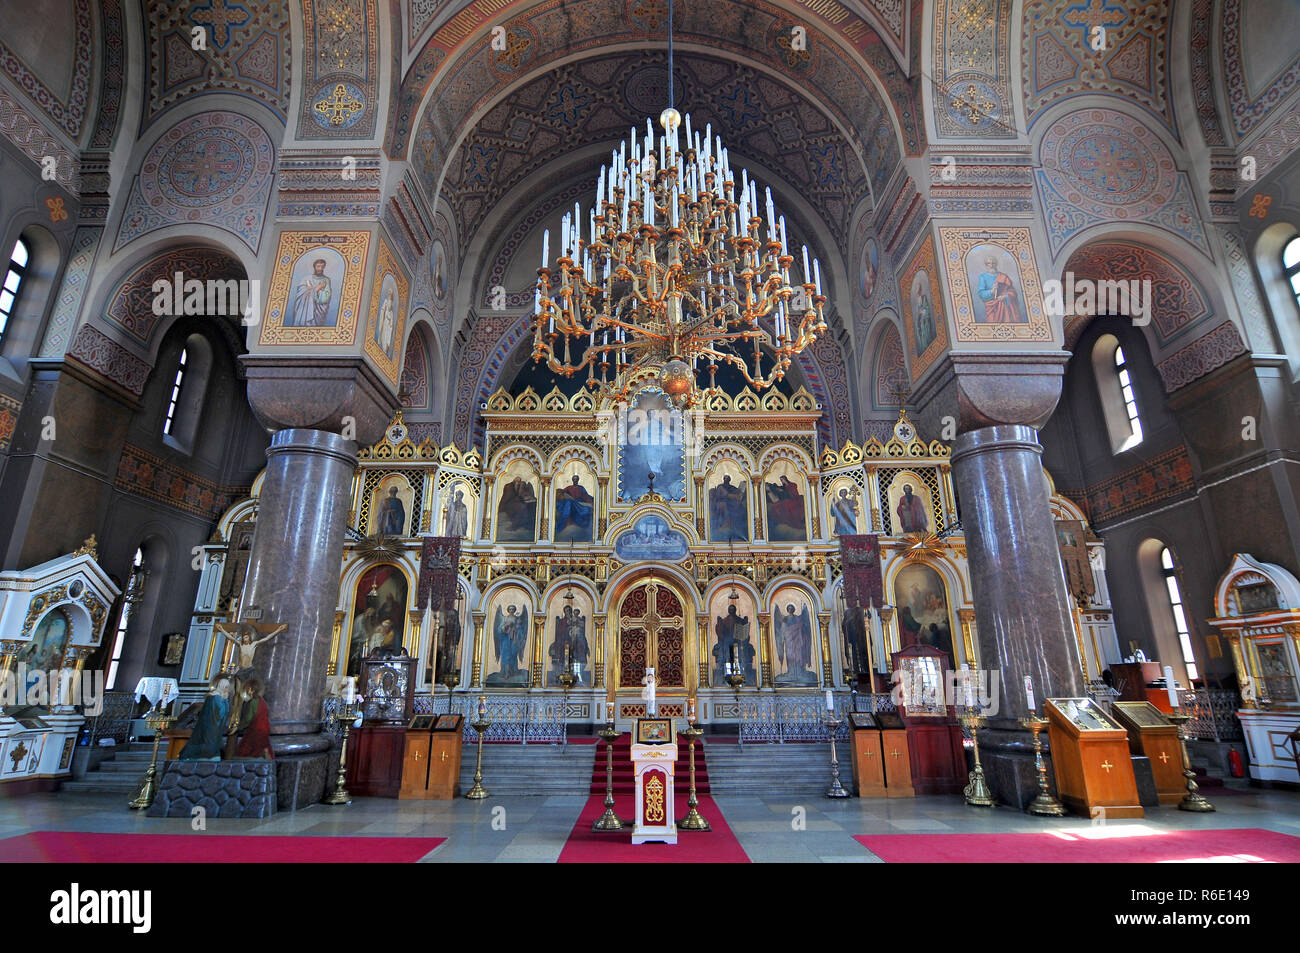 Detail Of The Interior Of The Uspenski Cathedral In Helsinki, Finland Stock Photo